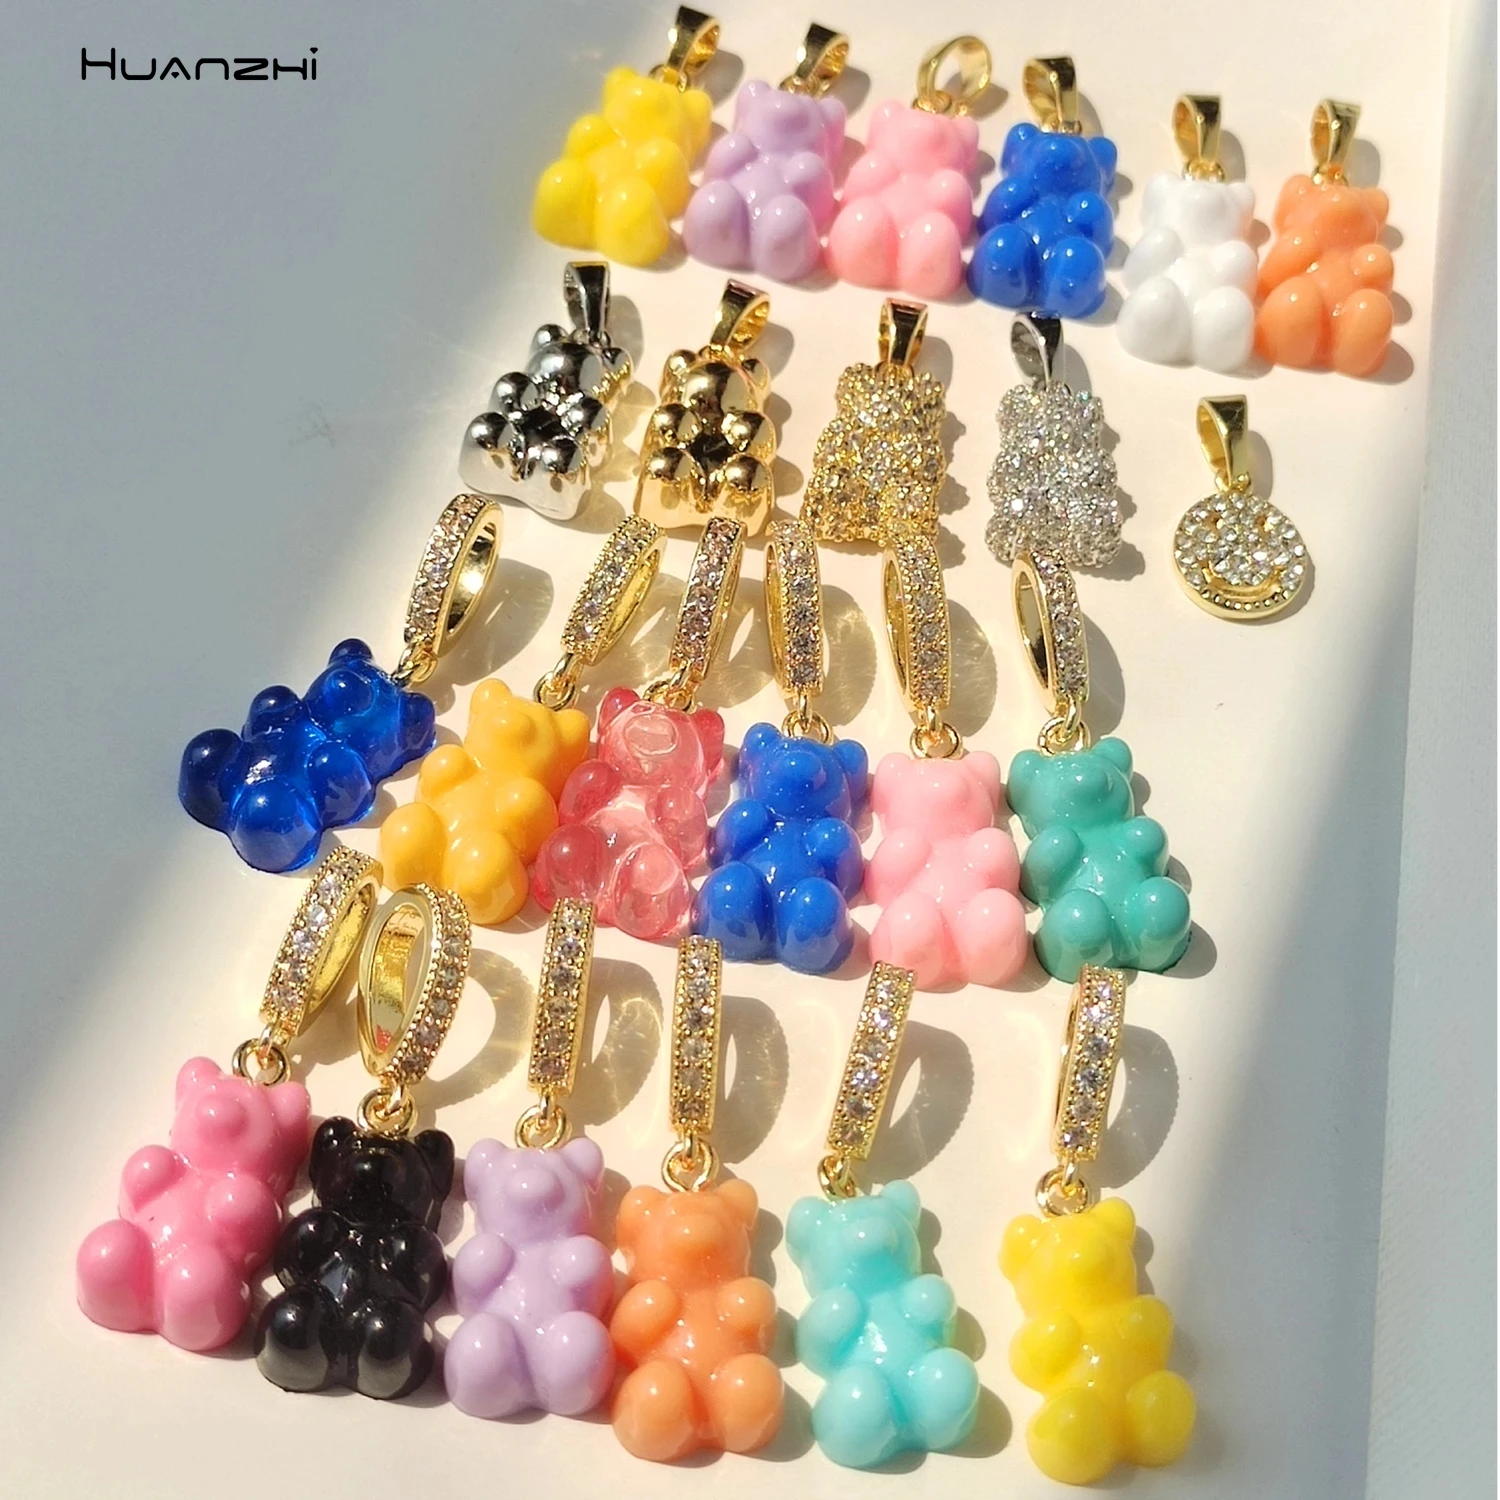 New Resin Zircon Teddy Bear Charm Crystal Heart Gold Color Metal Choker Necklace For Women Girls Party Jewelry HUANZHI 2022